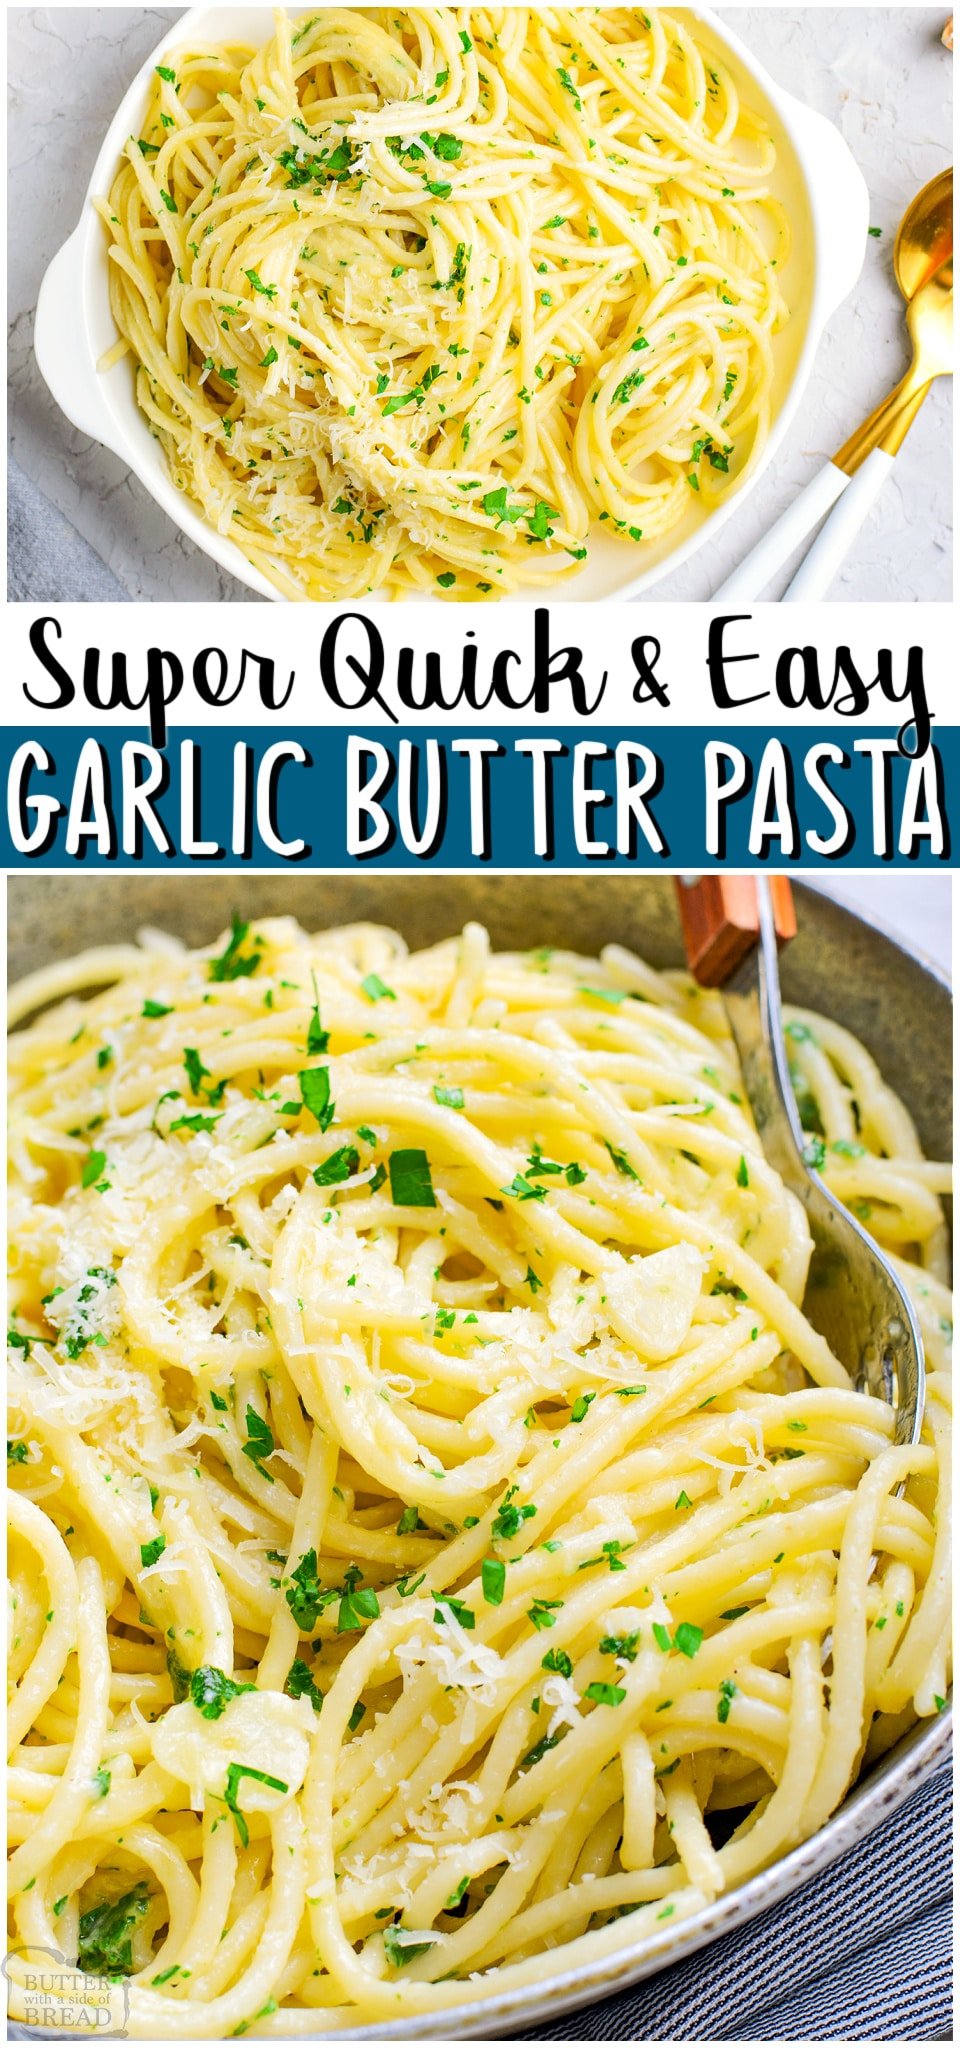 Garlic Butter Pasta recipe made with simple ingredients like spaghetti, garlic, butter & Parmesan cheese! Easy buttered pasta done in just 20 minutes & perfect for dinner or a side dish. 